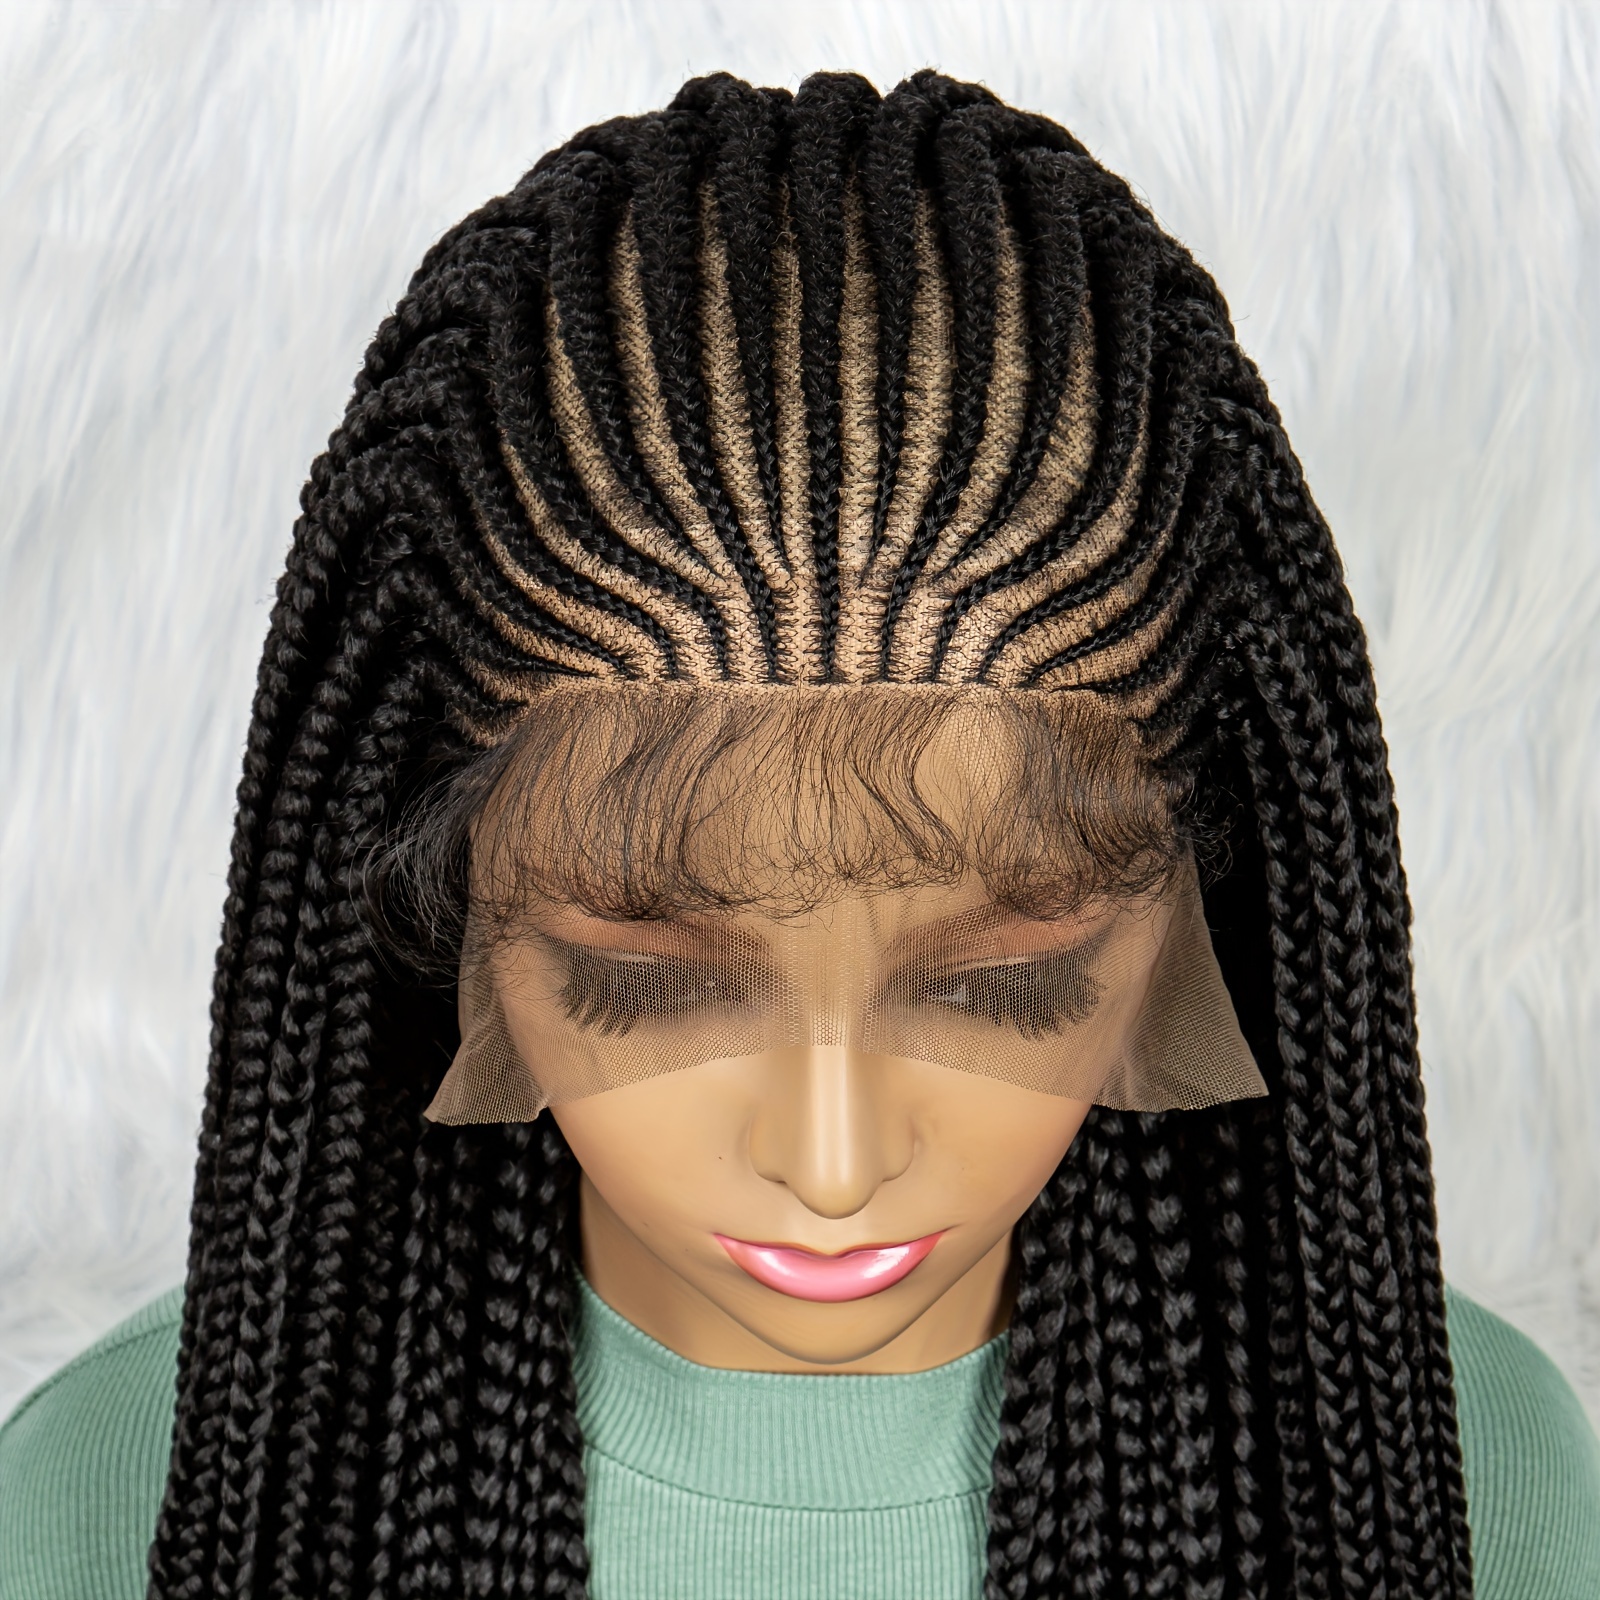 Twists Lace Braided Wigs For Black Women Black Color Braids Wig With Baby  Hair Heat Resistant Fiber Wig For Drag Queen (32 Inch, Real Braided Wigs